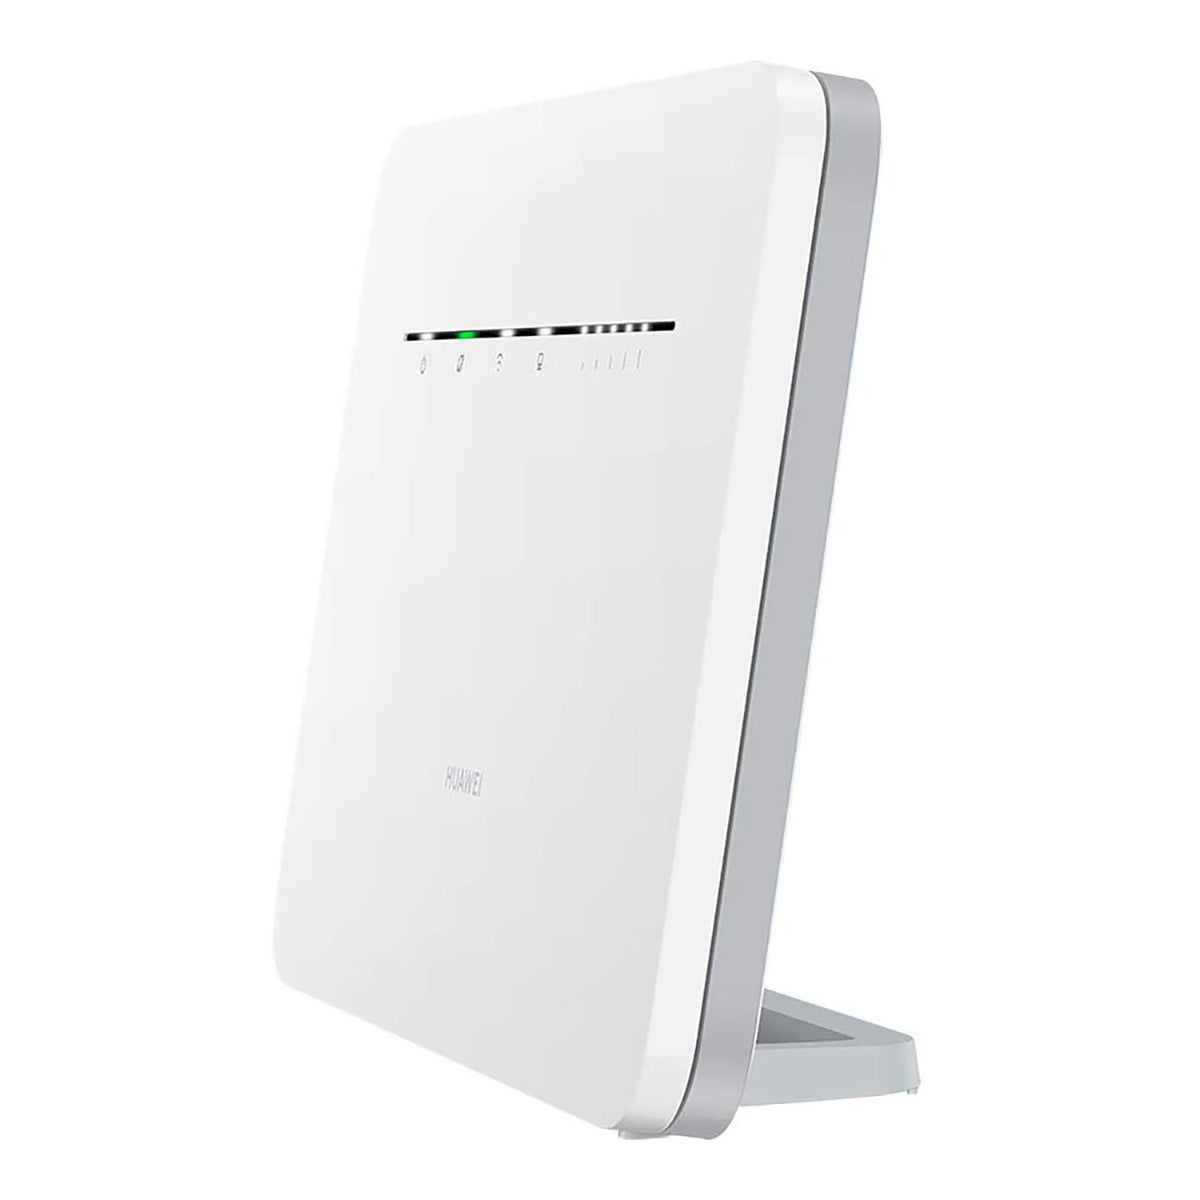 Huawei B535-232 - Dual-band (2.4 GHz / 5 GHz) 4G wireless router in White